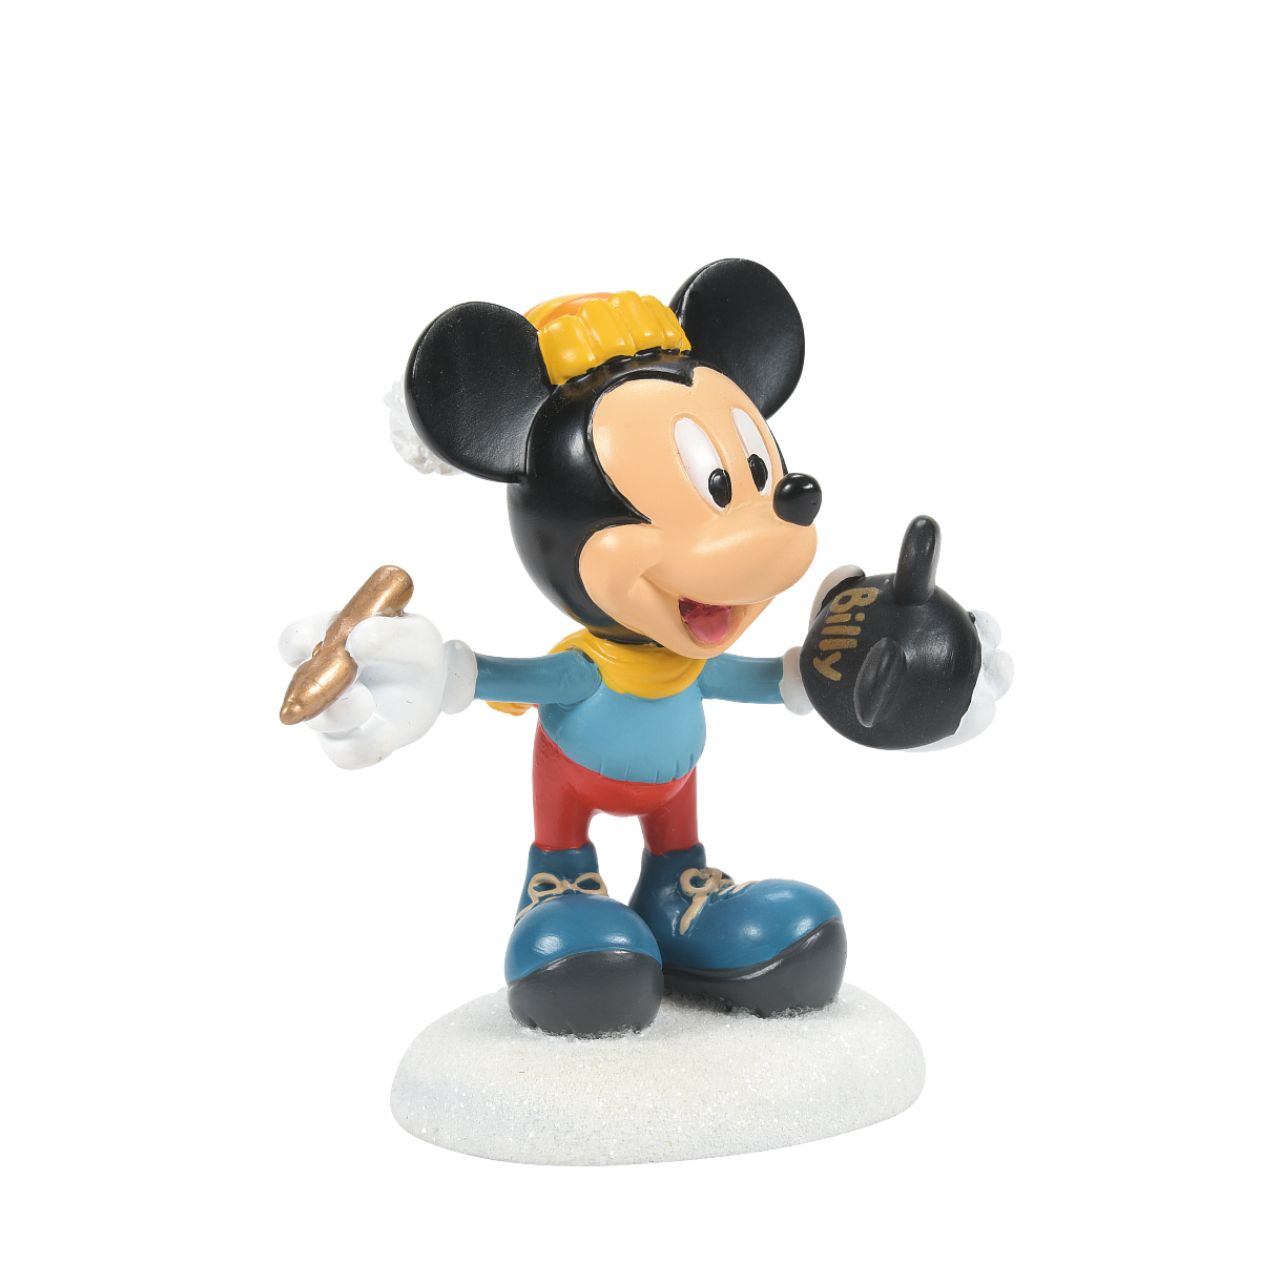 Disney Mickey's Finishing Touches Figurine  The iconic Mickey Mouse is here to add his flair to his Ear Hats. You can see him add a name in his special gold pen and we know this will be a treasured gift. Made from high quality cast stone before our skilled artists hand paint each intricate detail into place.